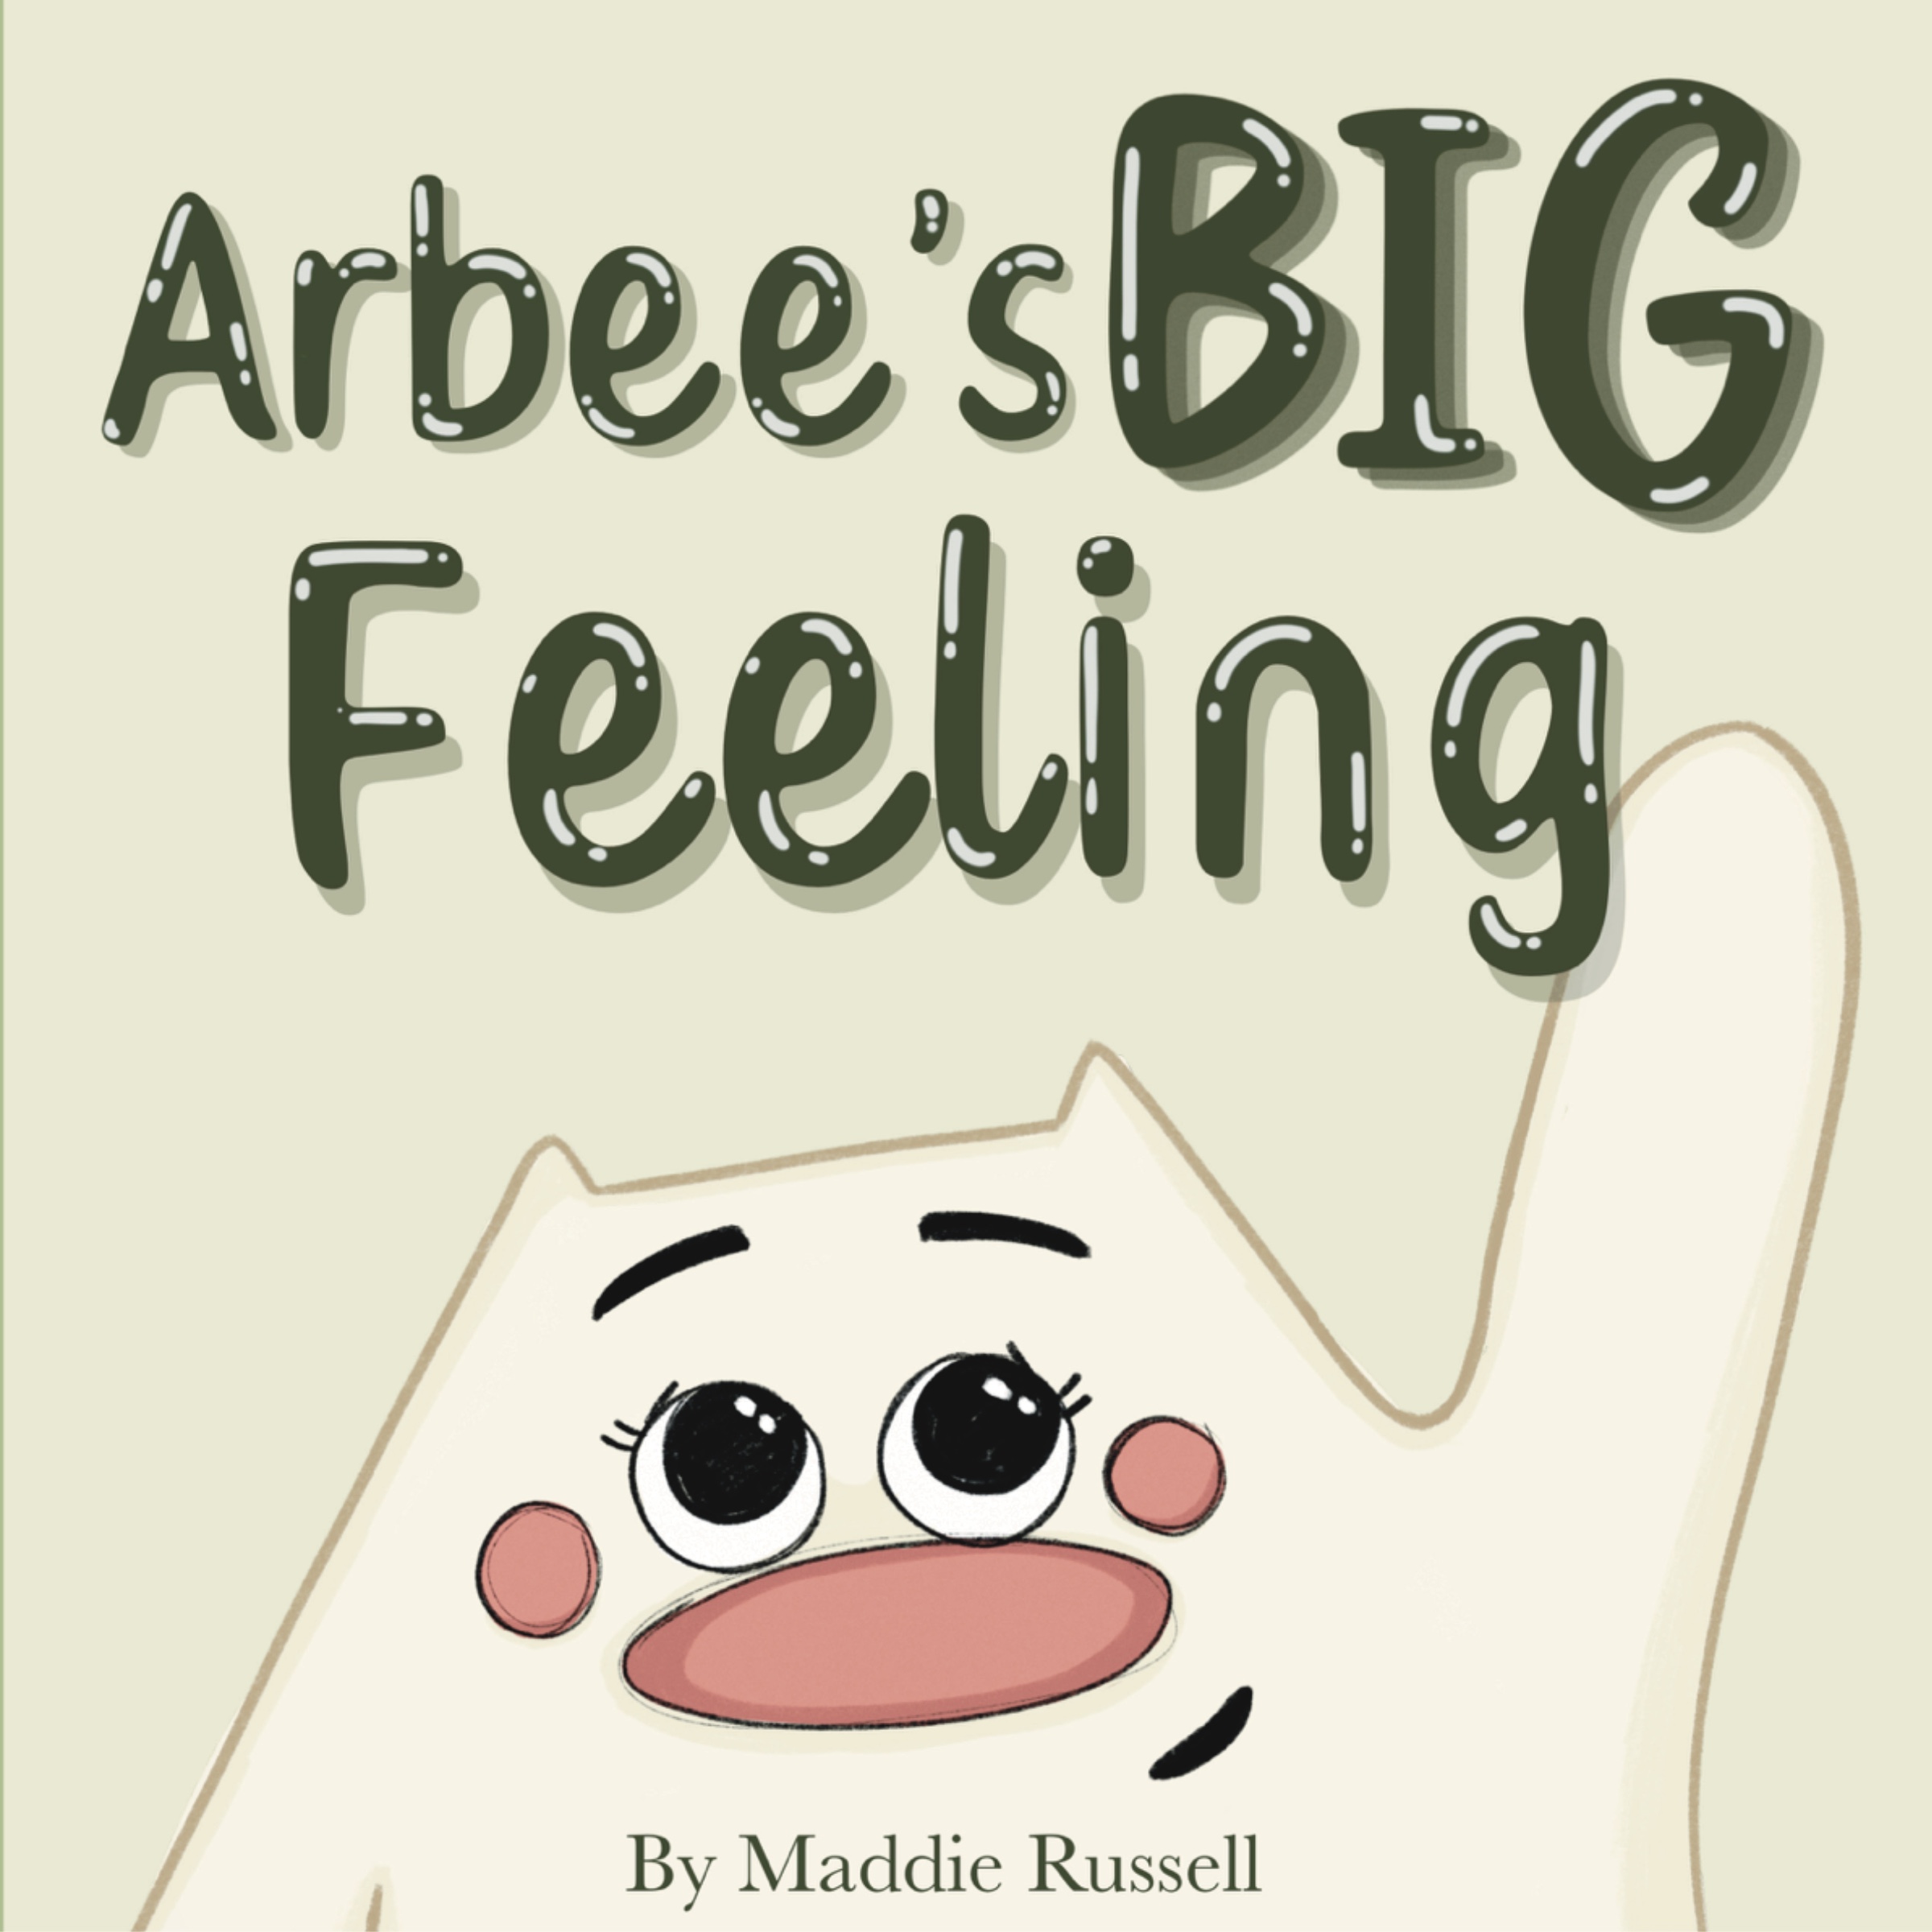 A book front cover of Arbee reaching up to the title, designed by Maddie Russell for 'Arbee's Big Feeling'.